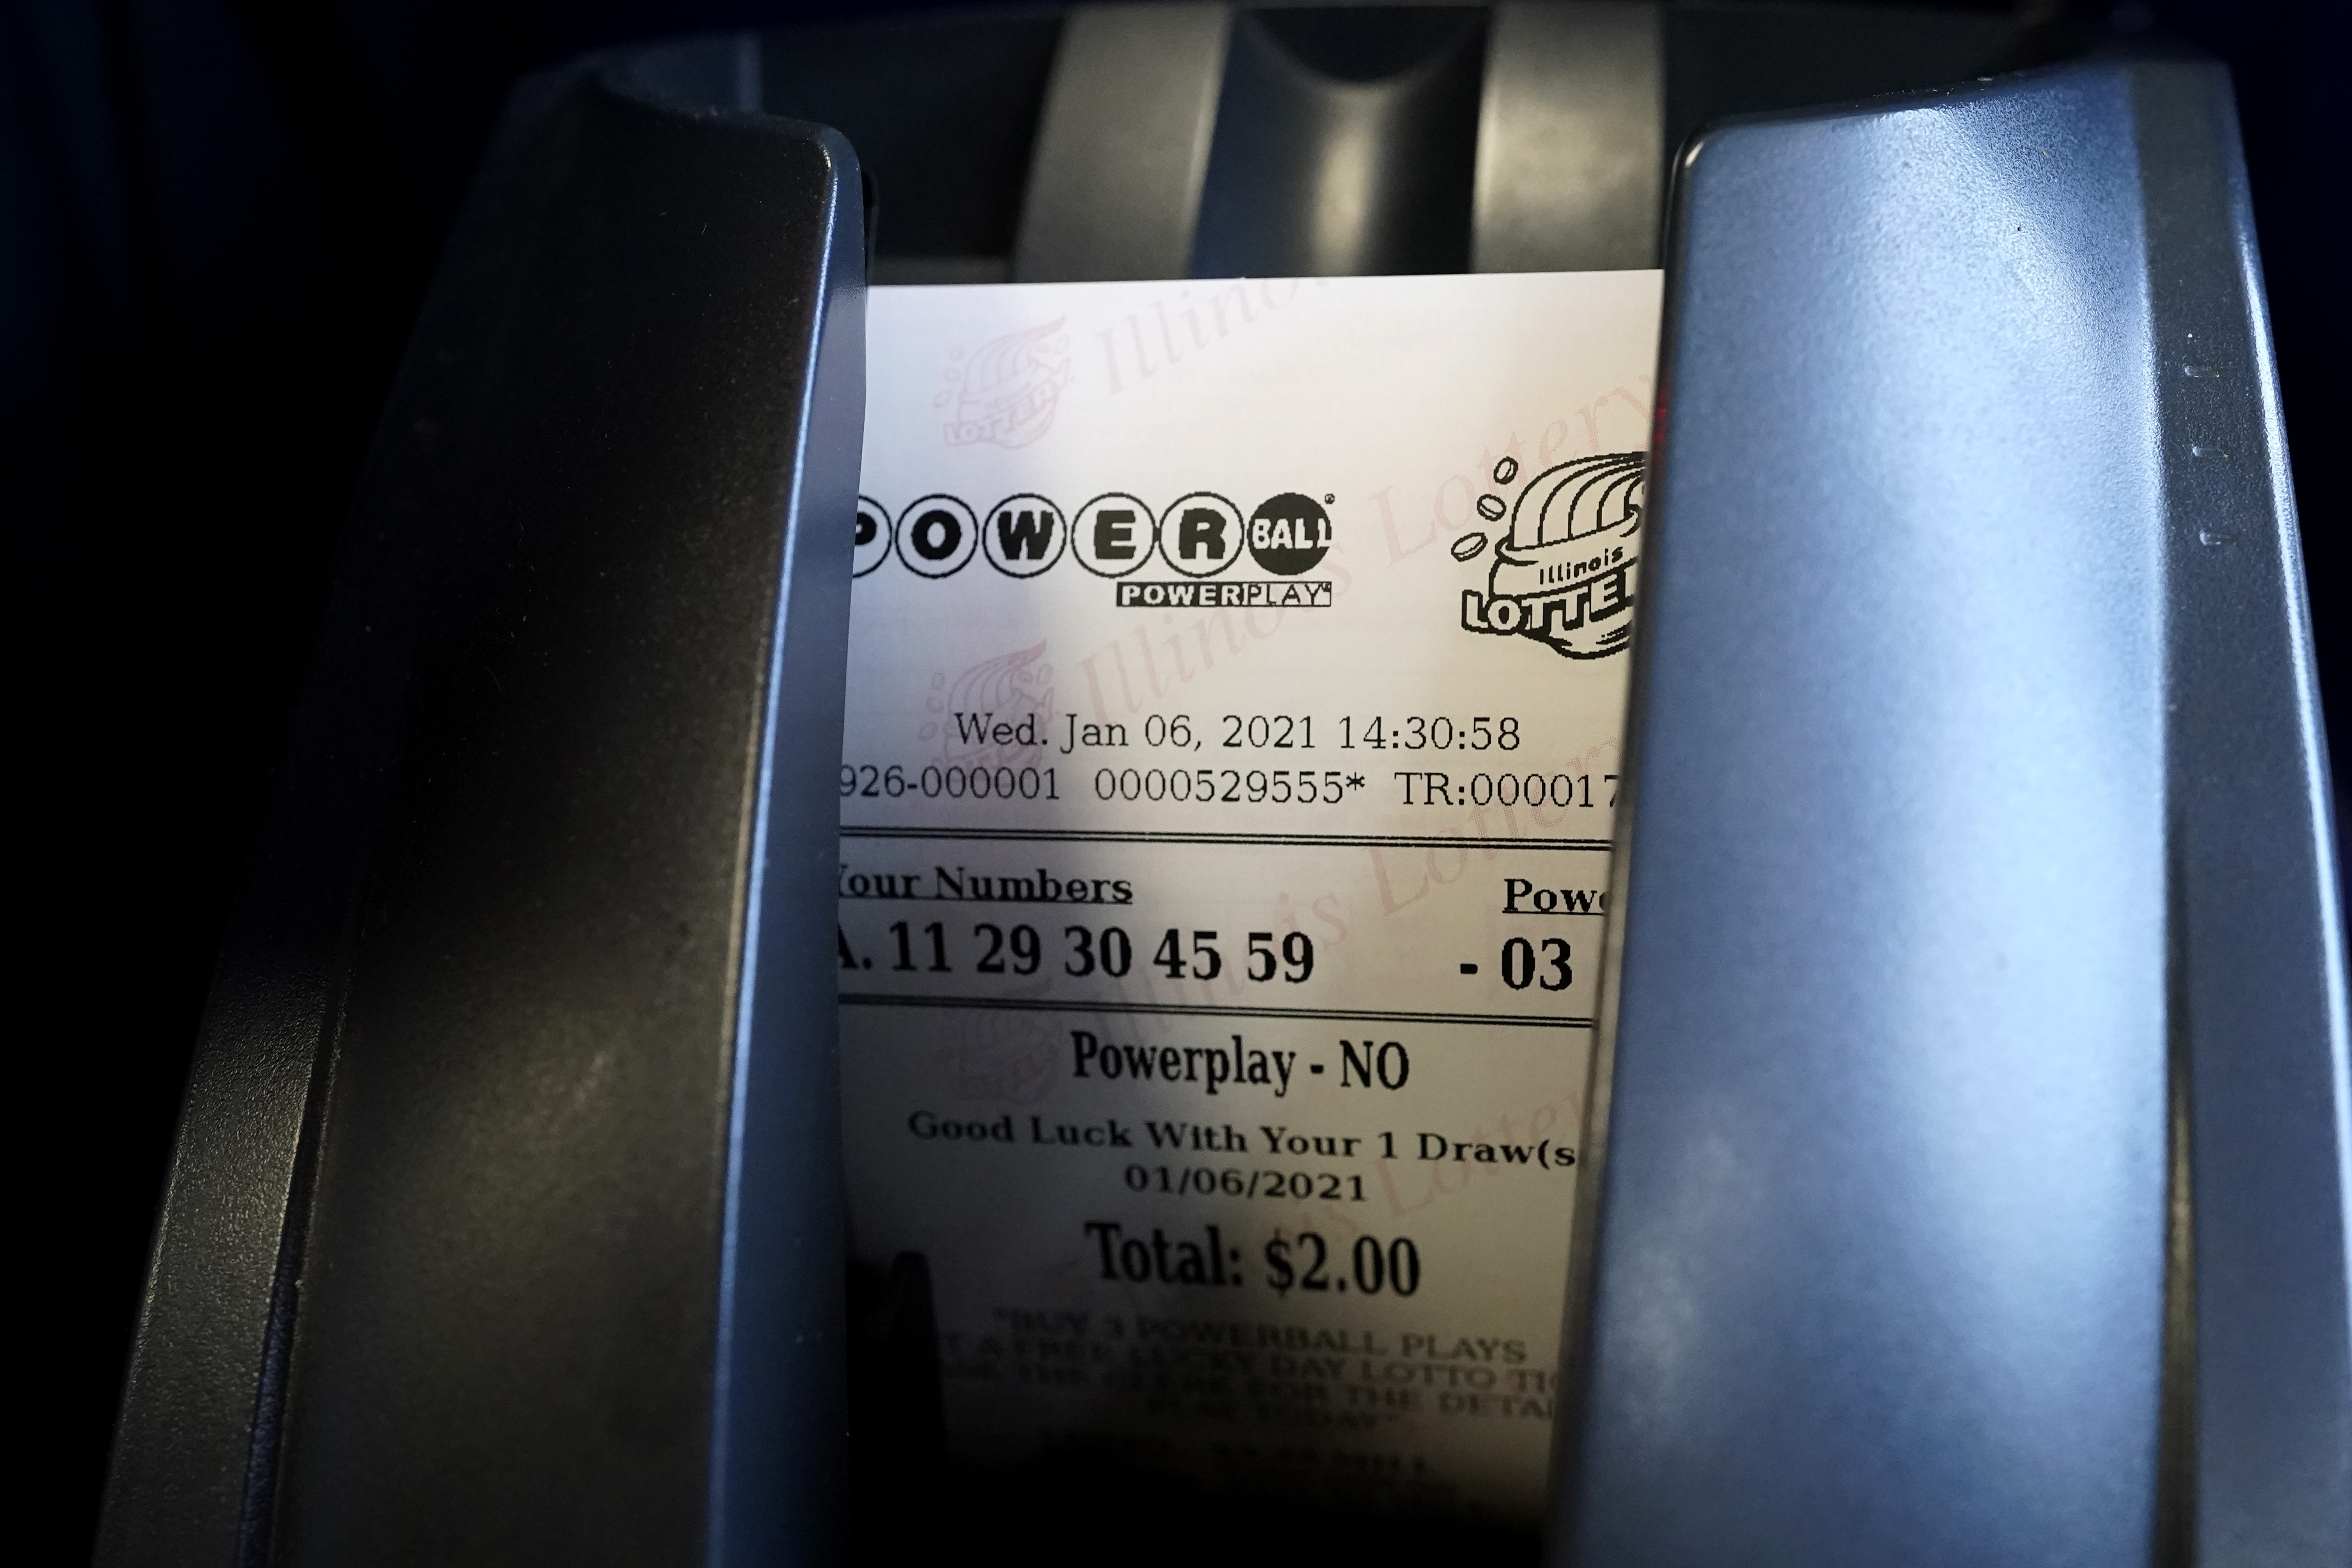 powerball jackpot the most common numbers drawn wghp fox8 on what numbers come up most in powerball drawings